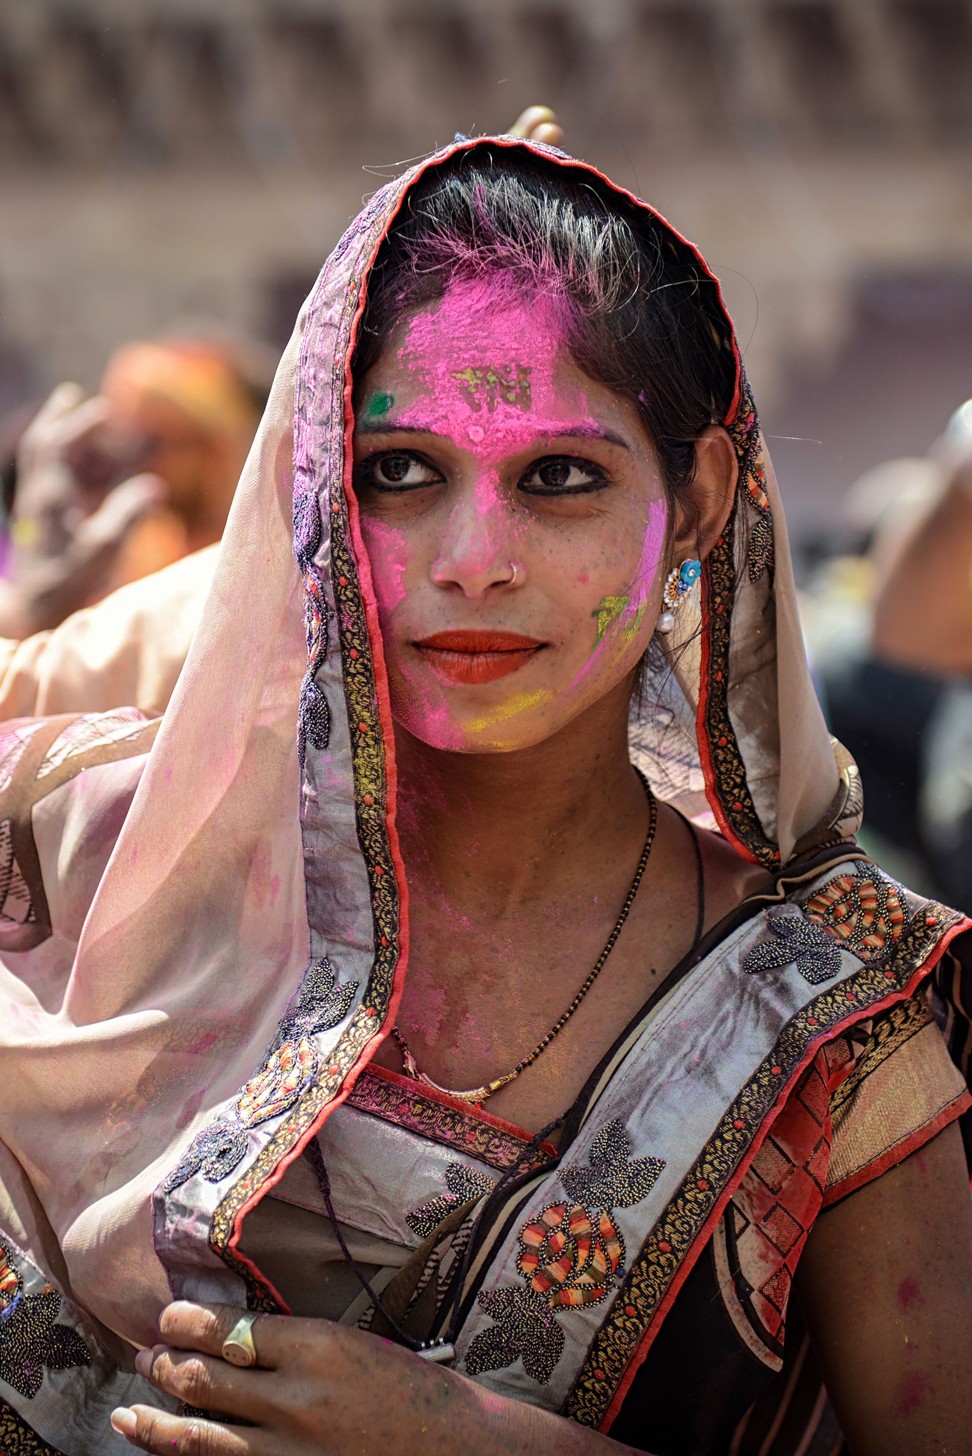 A woman celebrating Holi during a traditional gathering at a temple in Nandgaon village in Uttar Pradesh state. Photo: AFP